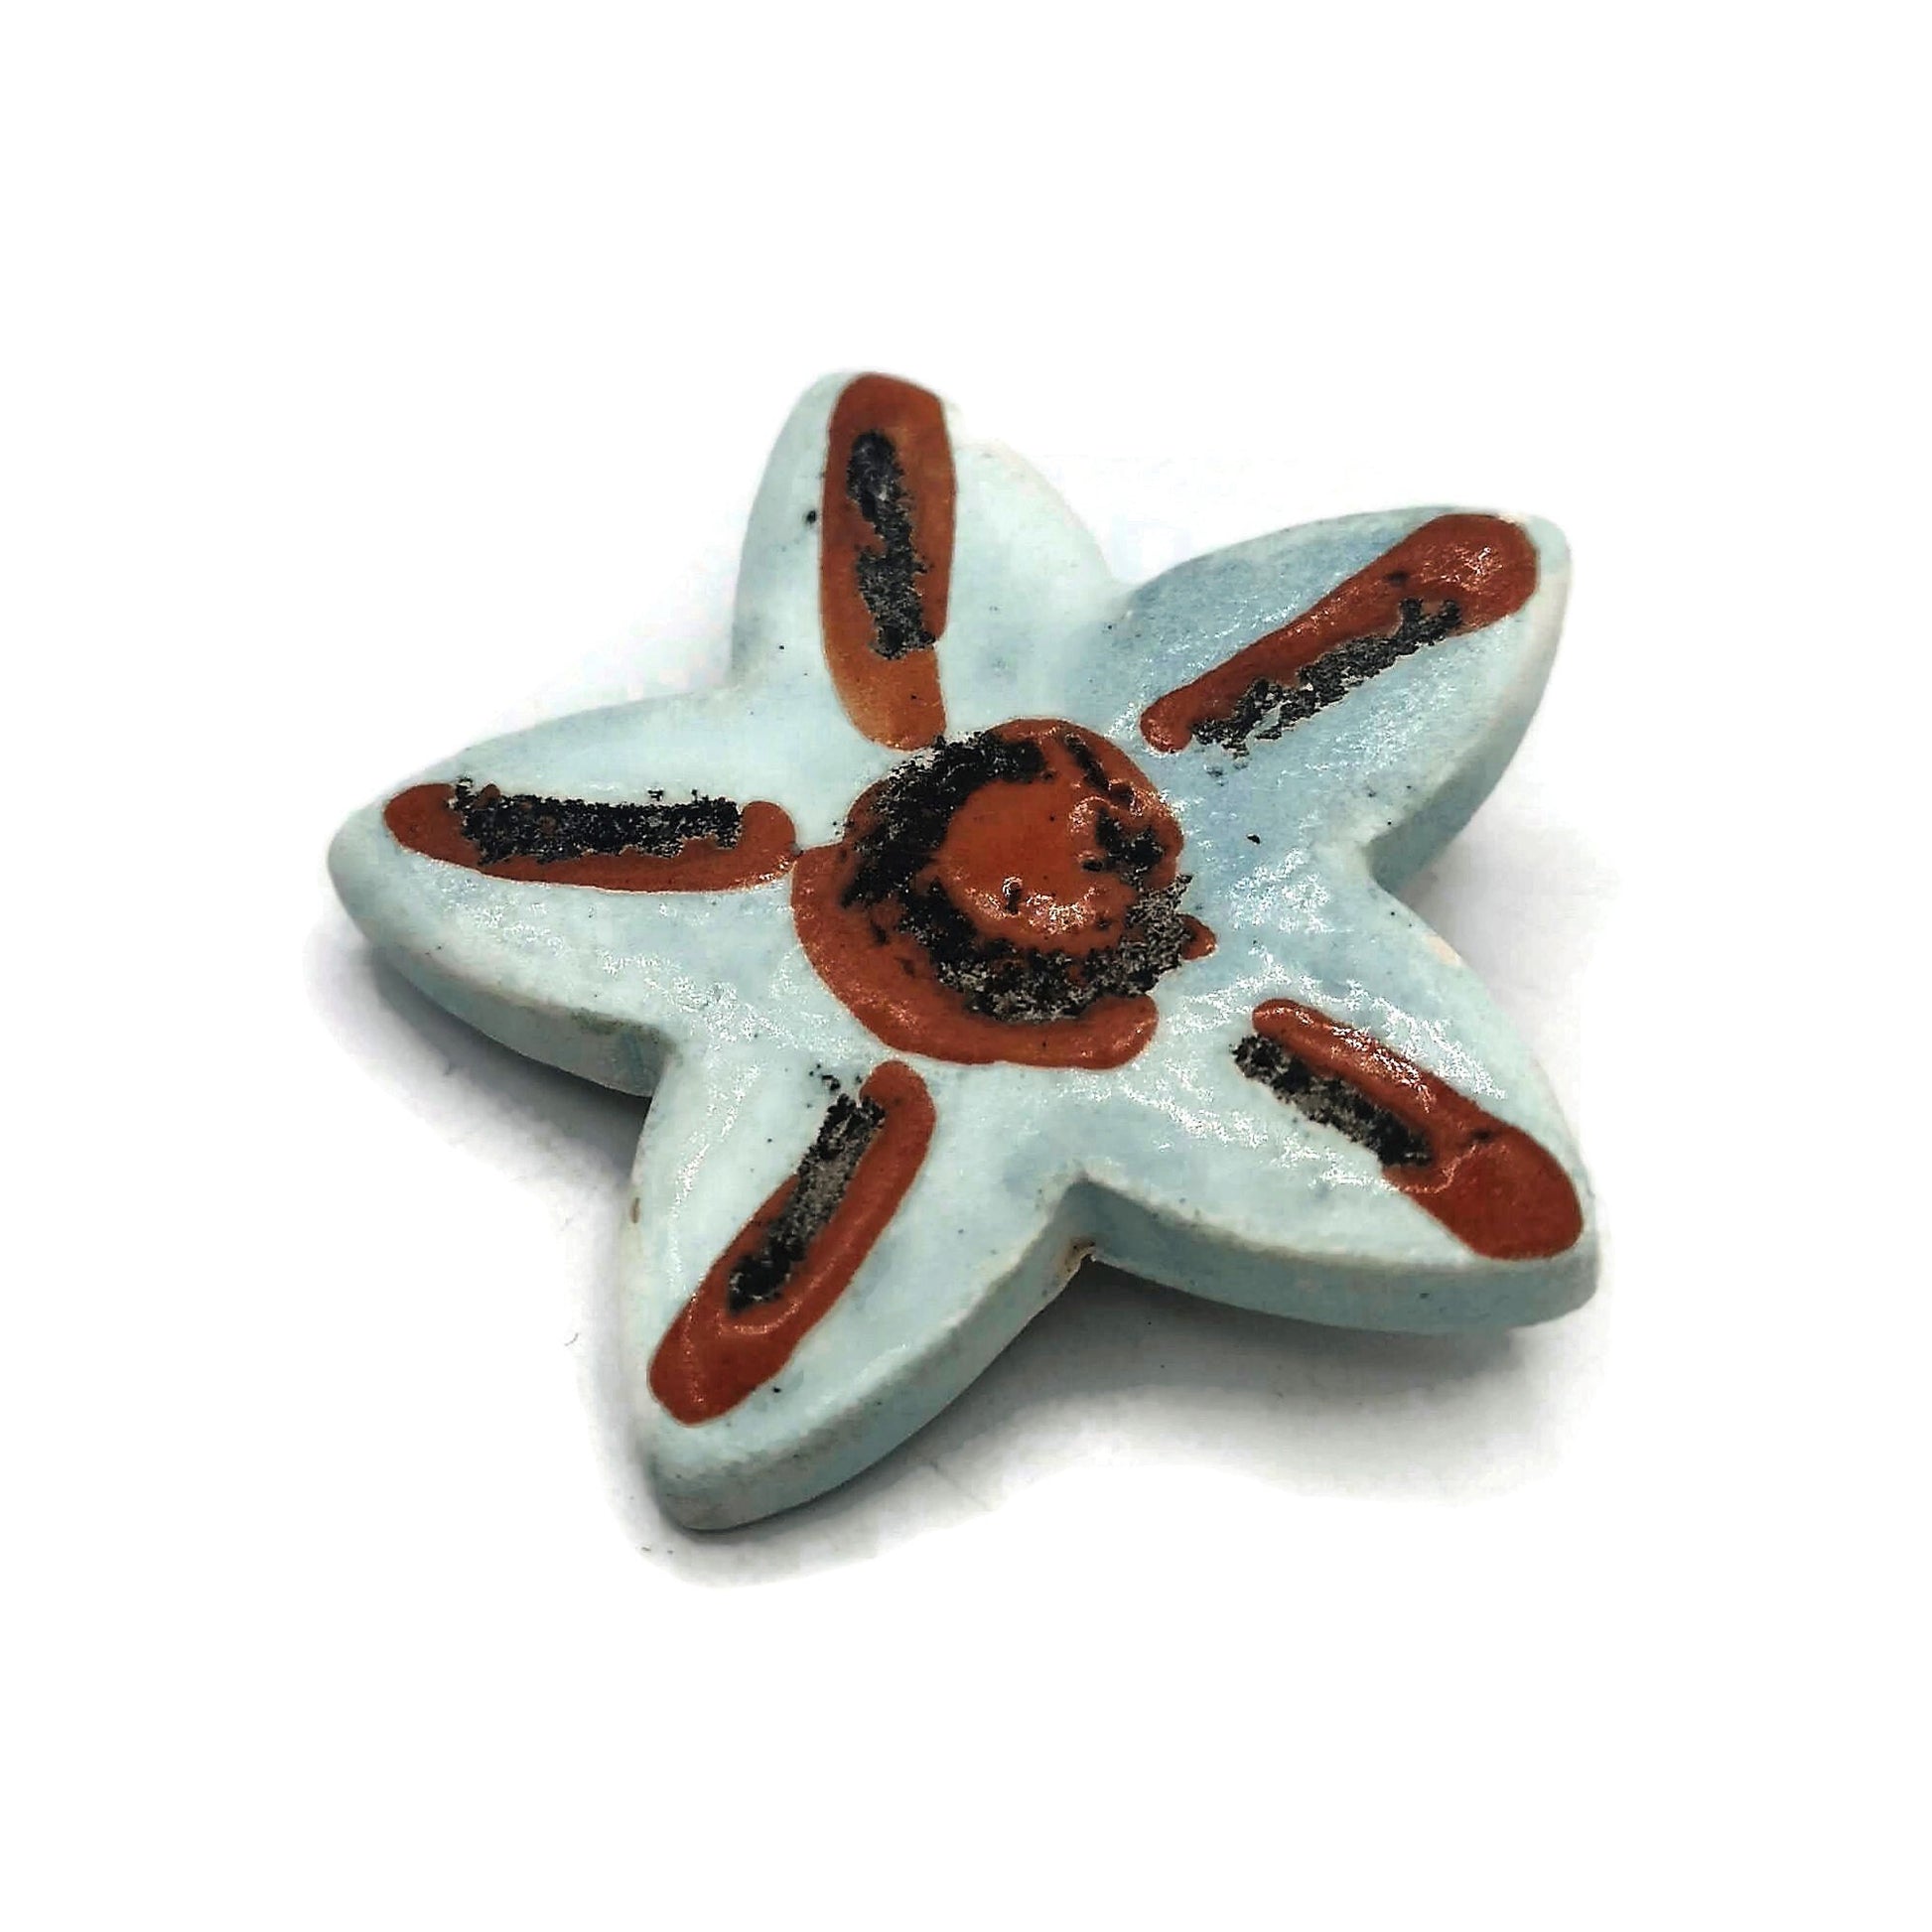 Star Brooch, Celestial Brooch, Ceramic Jewelry Mothers Day Gift For Grandma, Broach Pin Mom Birthday Gift From Daughter - Ceramica Ana Rafael